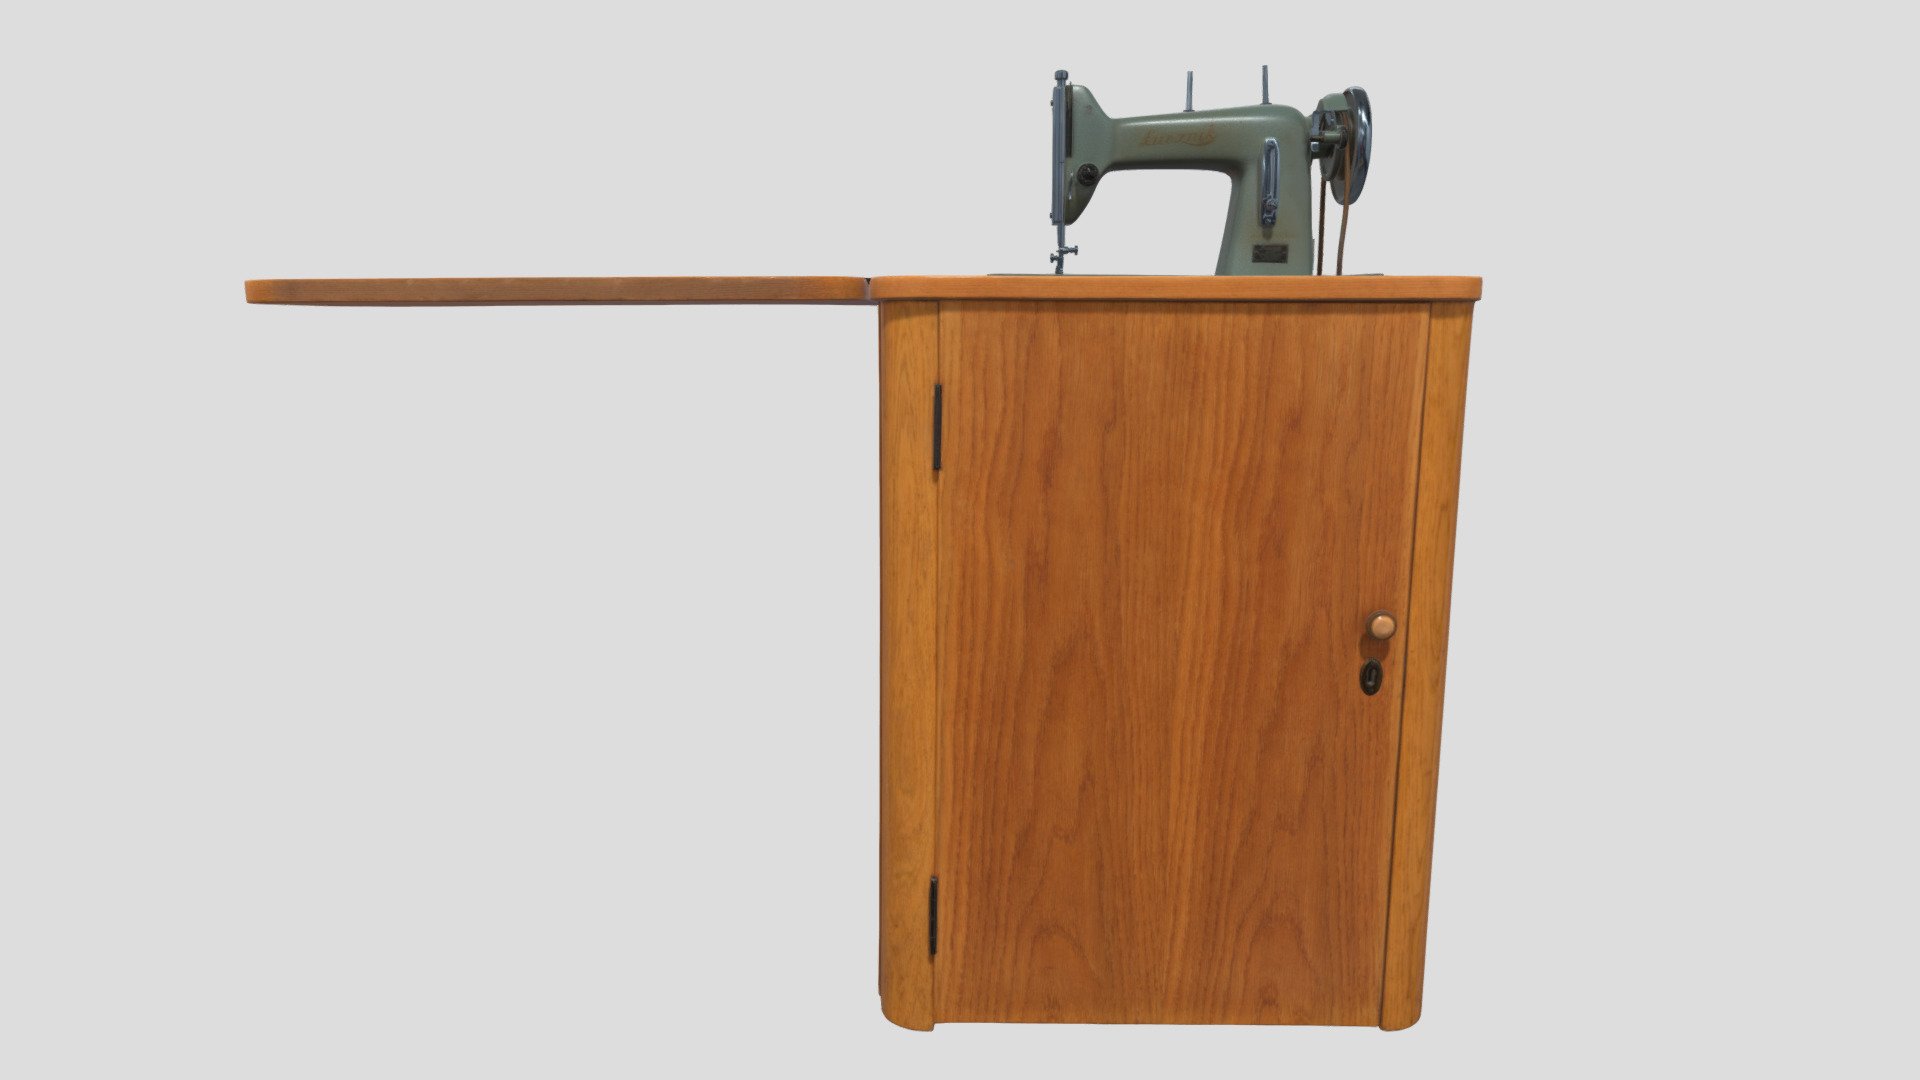 The device was designed as a straight-seam machine for sewing light- and medium-weight fabrics such as canvas, silk, wool, and cotton. It stitched forwards and in reverse depending on the position of the seam control lever. The direction of stitching could be changed while sewing. The arm was cast in cast-iron and weighed around 14 kg. A small inspection hole was placed at the back of the machine arm. The needle arm mechanism was covered with a shield. The KL 82/83 model presented here resembles the design of Singer #15 and Pfaff 30 machines. The devices were manufactured in two colours: black with gilded patterns or, as seen in the unit presented here, in a hammered grey coating. The machine has a motor socket, which suggests that it could be adapted to use electrical drive. 

Manufacturer: Zakłady Metalowe im. gen. Waltera in Radom, 1958 

Inv. No. MIM1353 /IX-134

Model prepared on the basis of photogrammetric measurements

Licence: CC BY-NC-SA (CC Attribution-NonCommercial-ShareAlike) - Łucznik KL 82/83 sewing machine - Download Free 3D model by Museum of Engineering and Technology, Krakow (@mitkrakow) 3d model